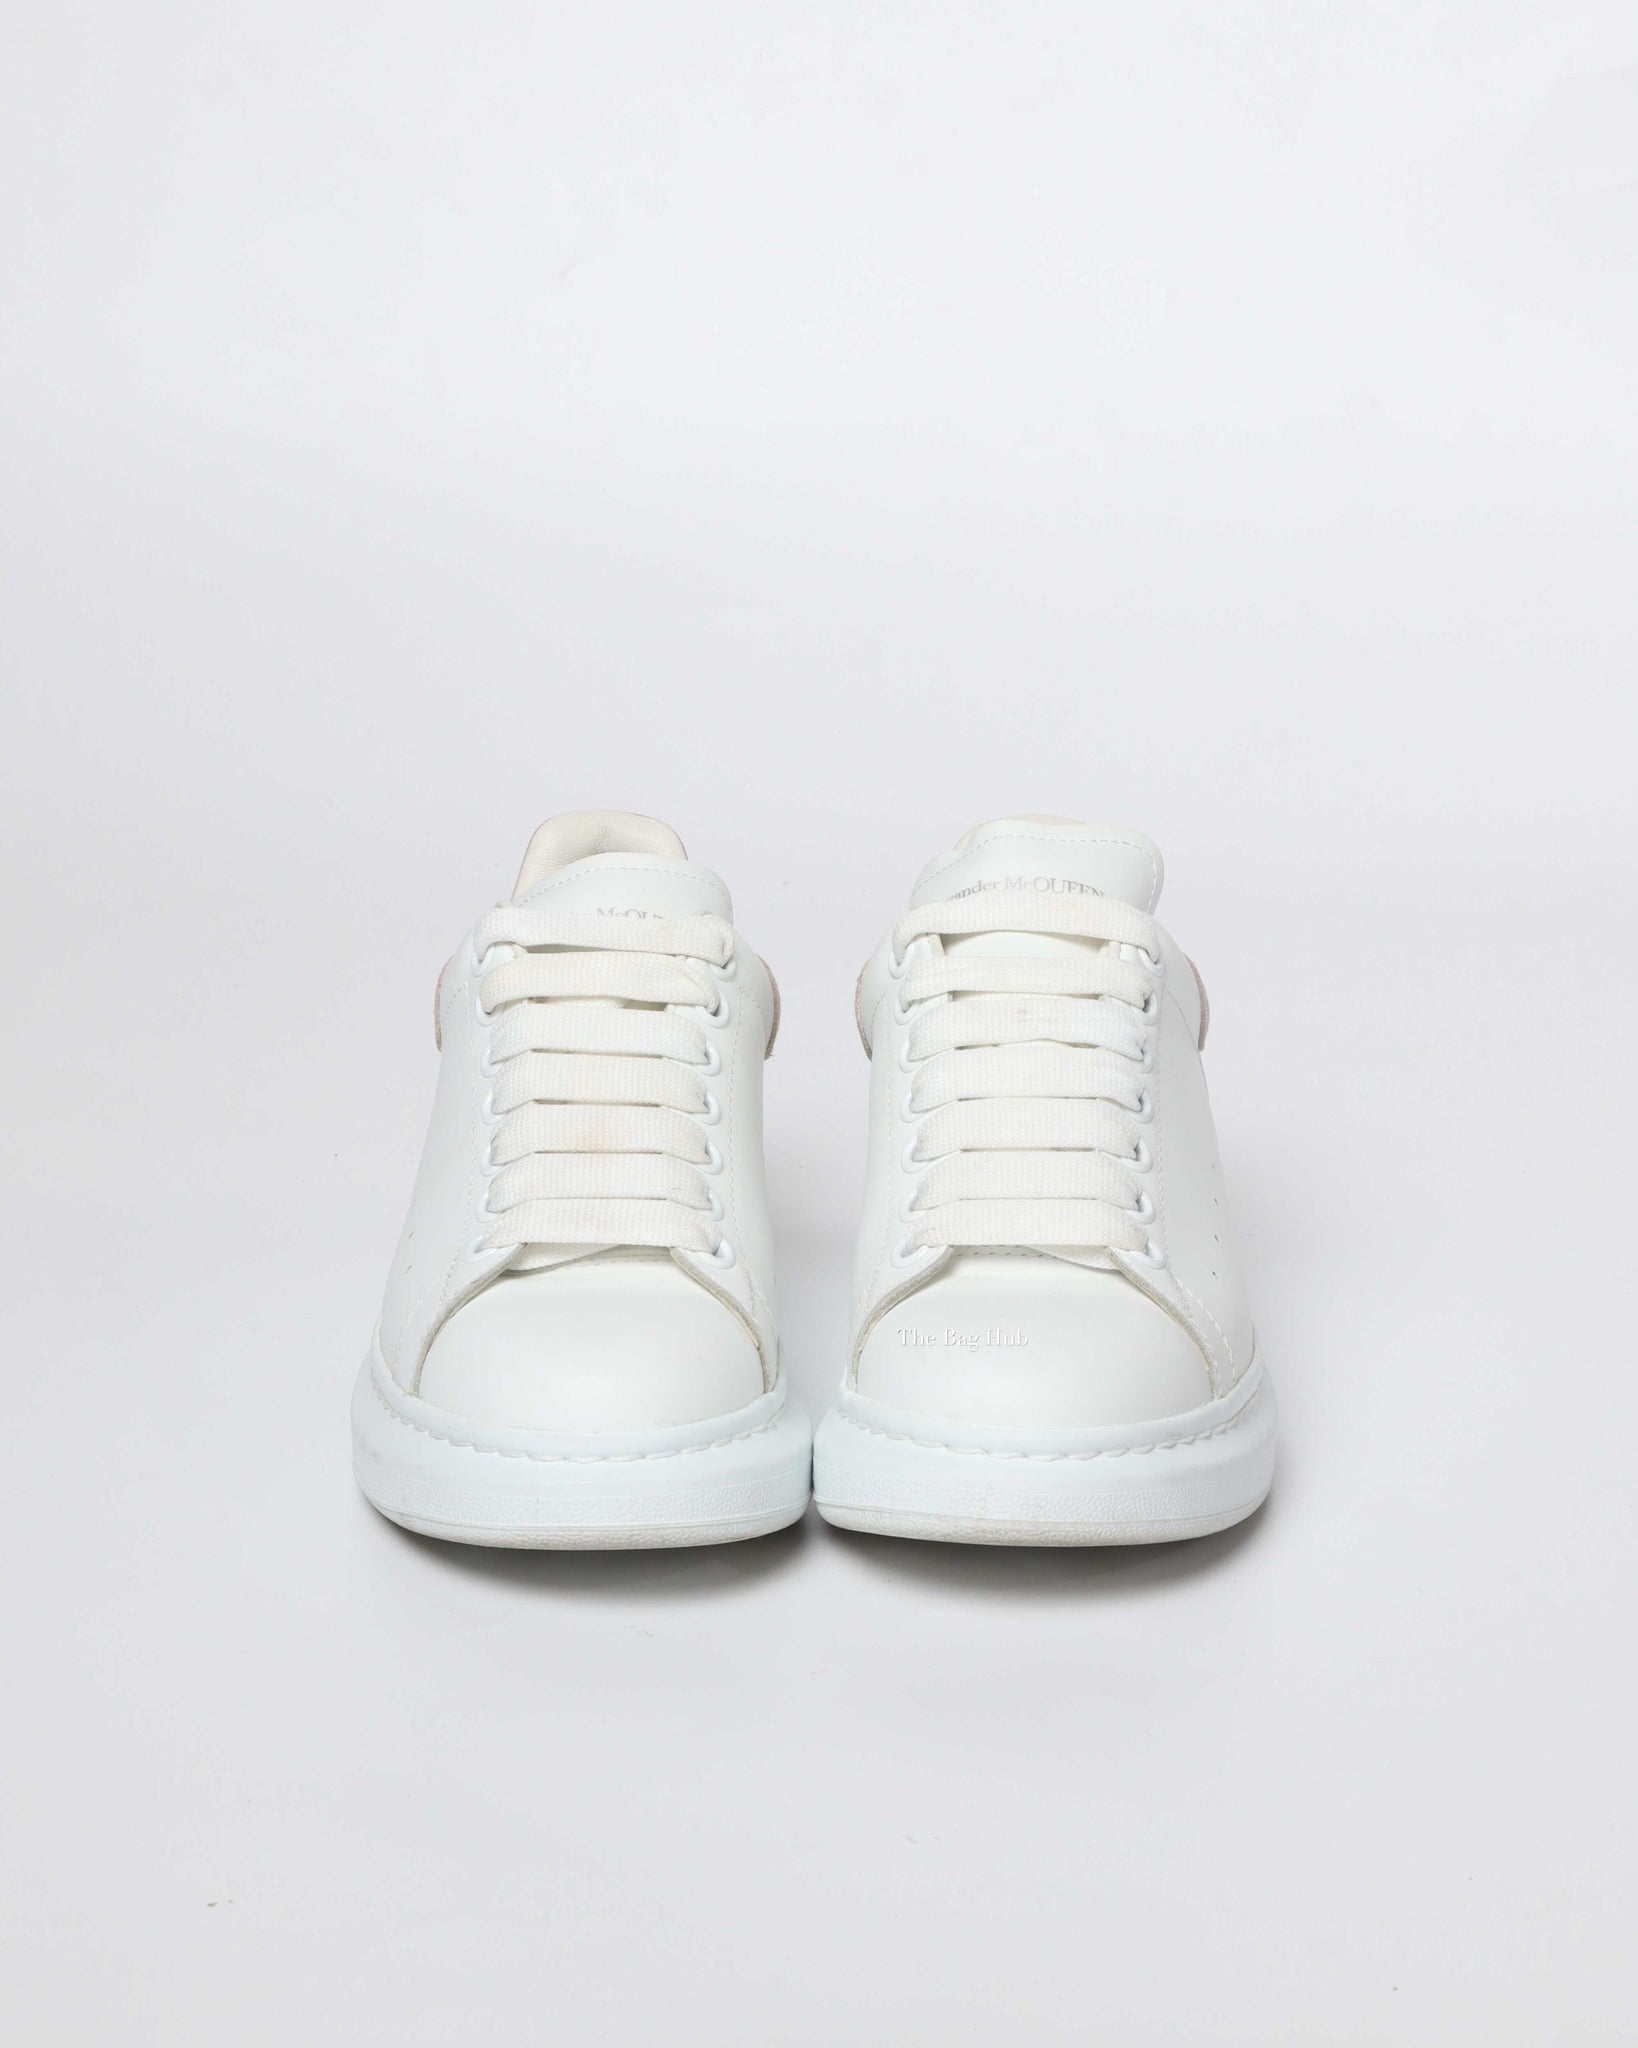 Alexander McQueen White & Pink Oversized Sneakers Size 37 - 3